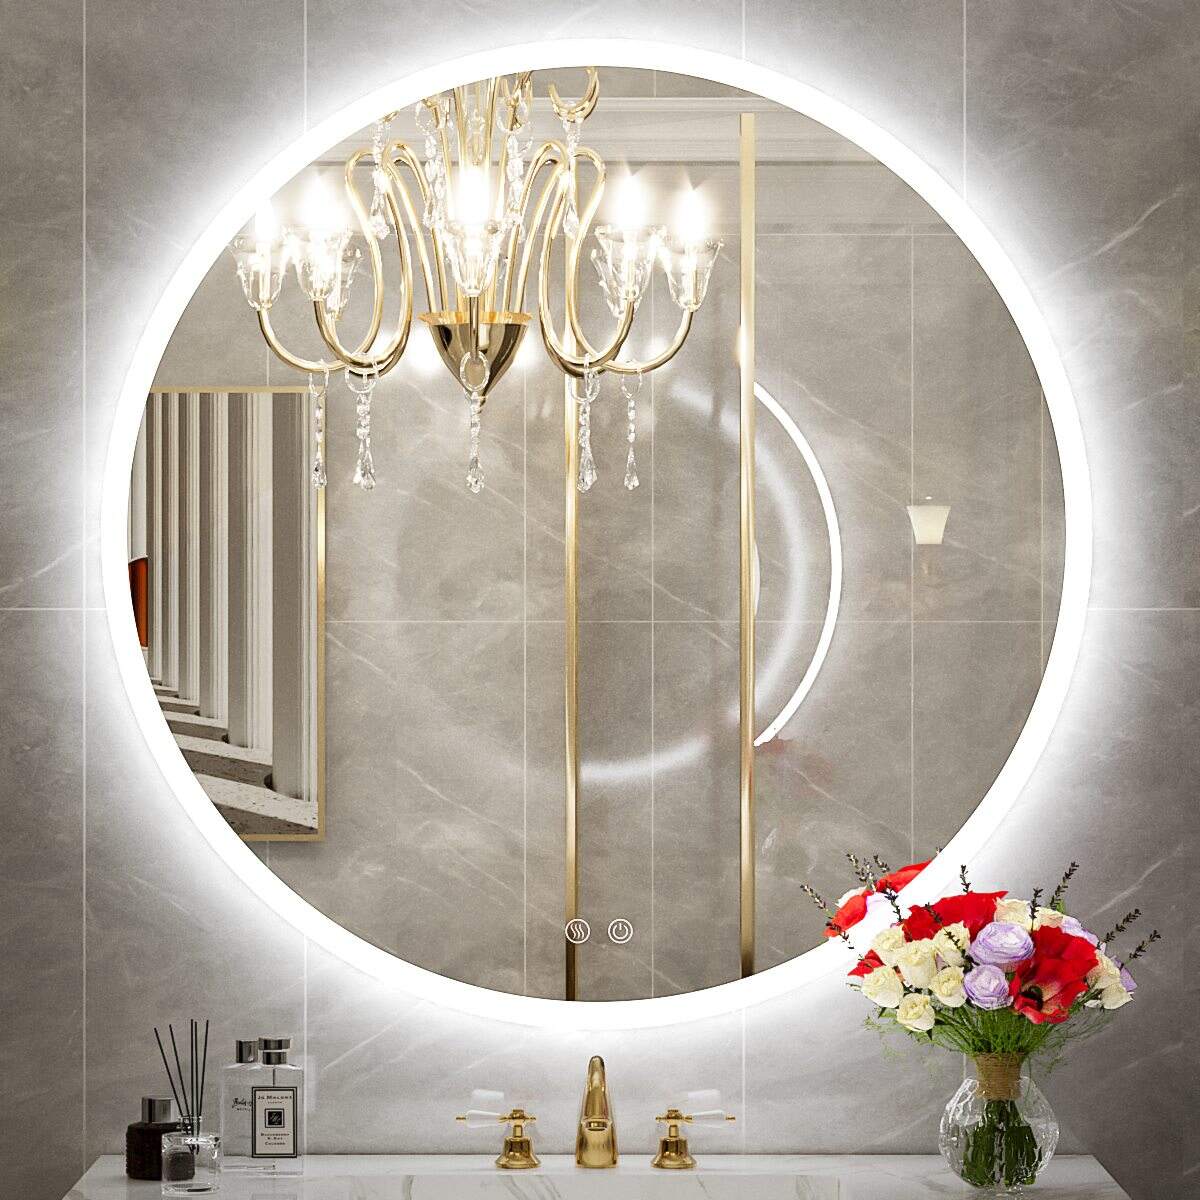 JJGullit bathroom mirror supplier 36 Inch Round LED Mirror for Bathroom, Front Lighted Vanity Mirror, Wall Mounted Bathroom Round Mirror with Lights, Wall Mounted Anti-Fog Dimmable Circle Mirror for Bedroom CRI 90